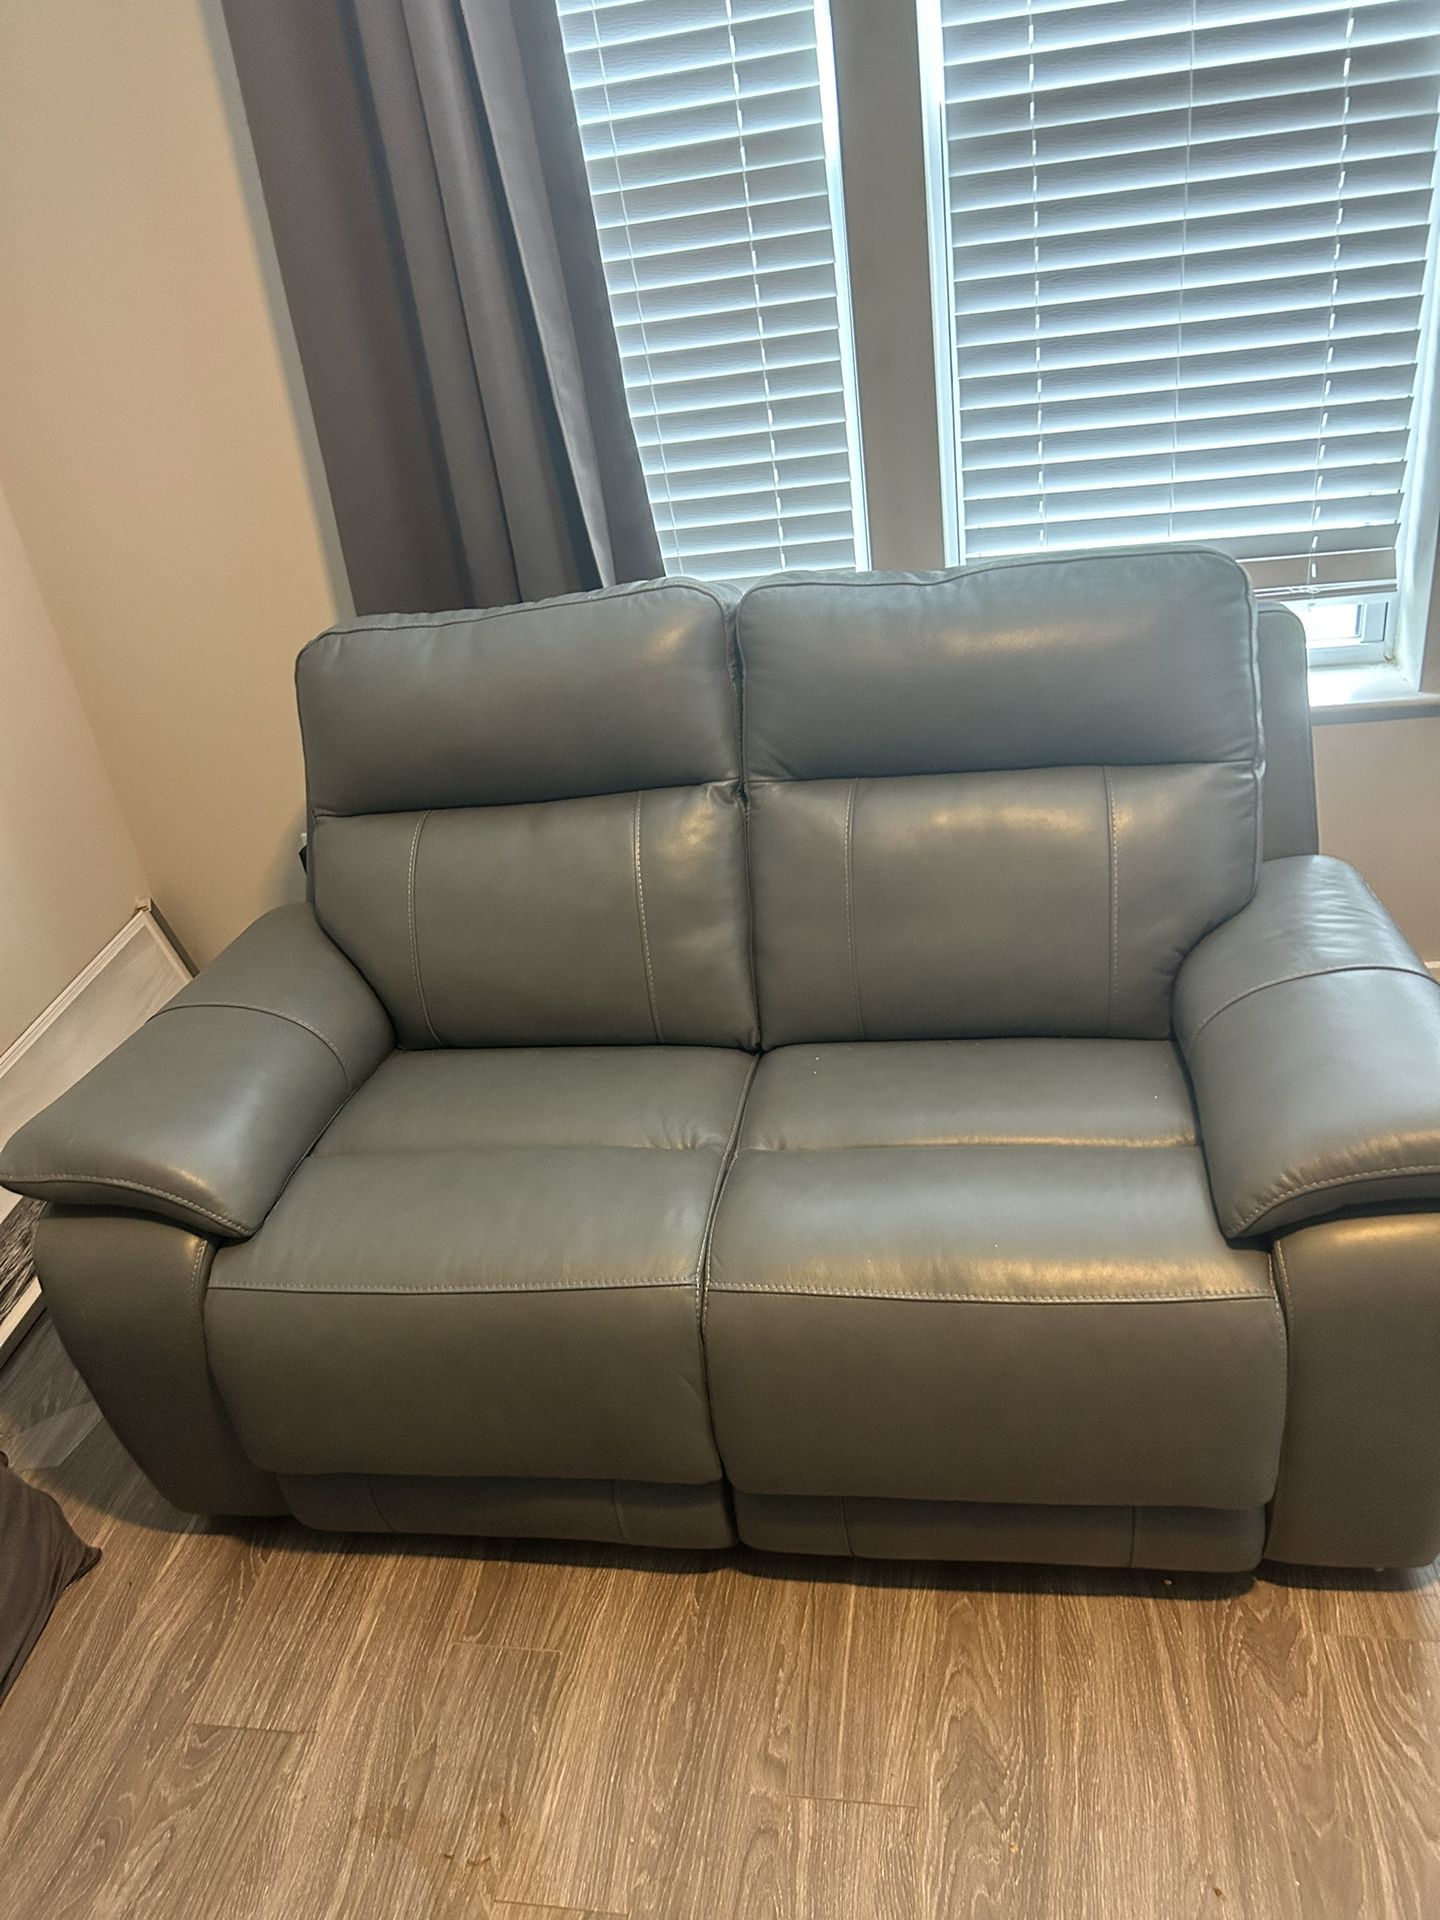 Leather Loveseat Recliner From Rooms To Go